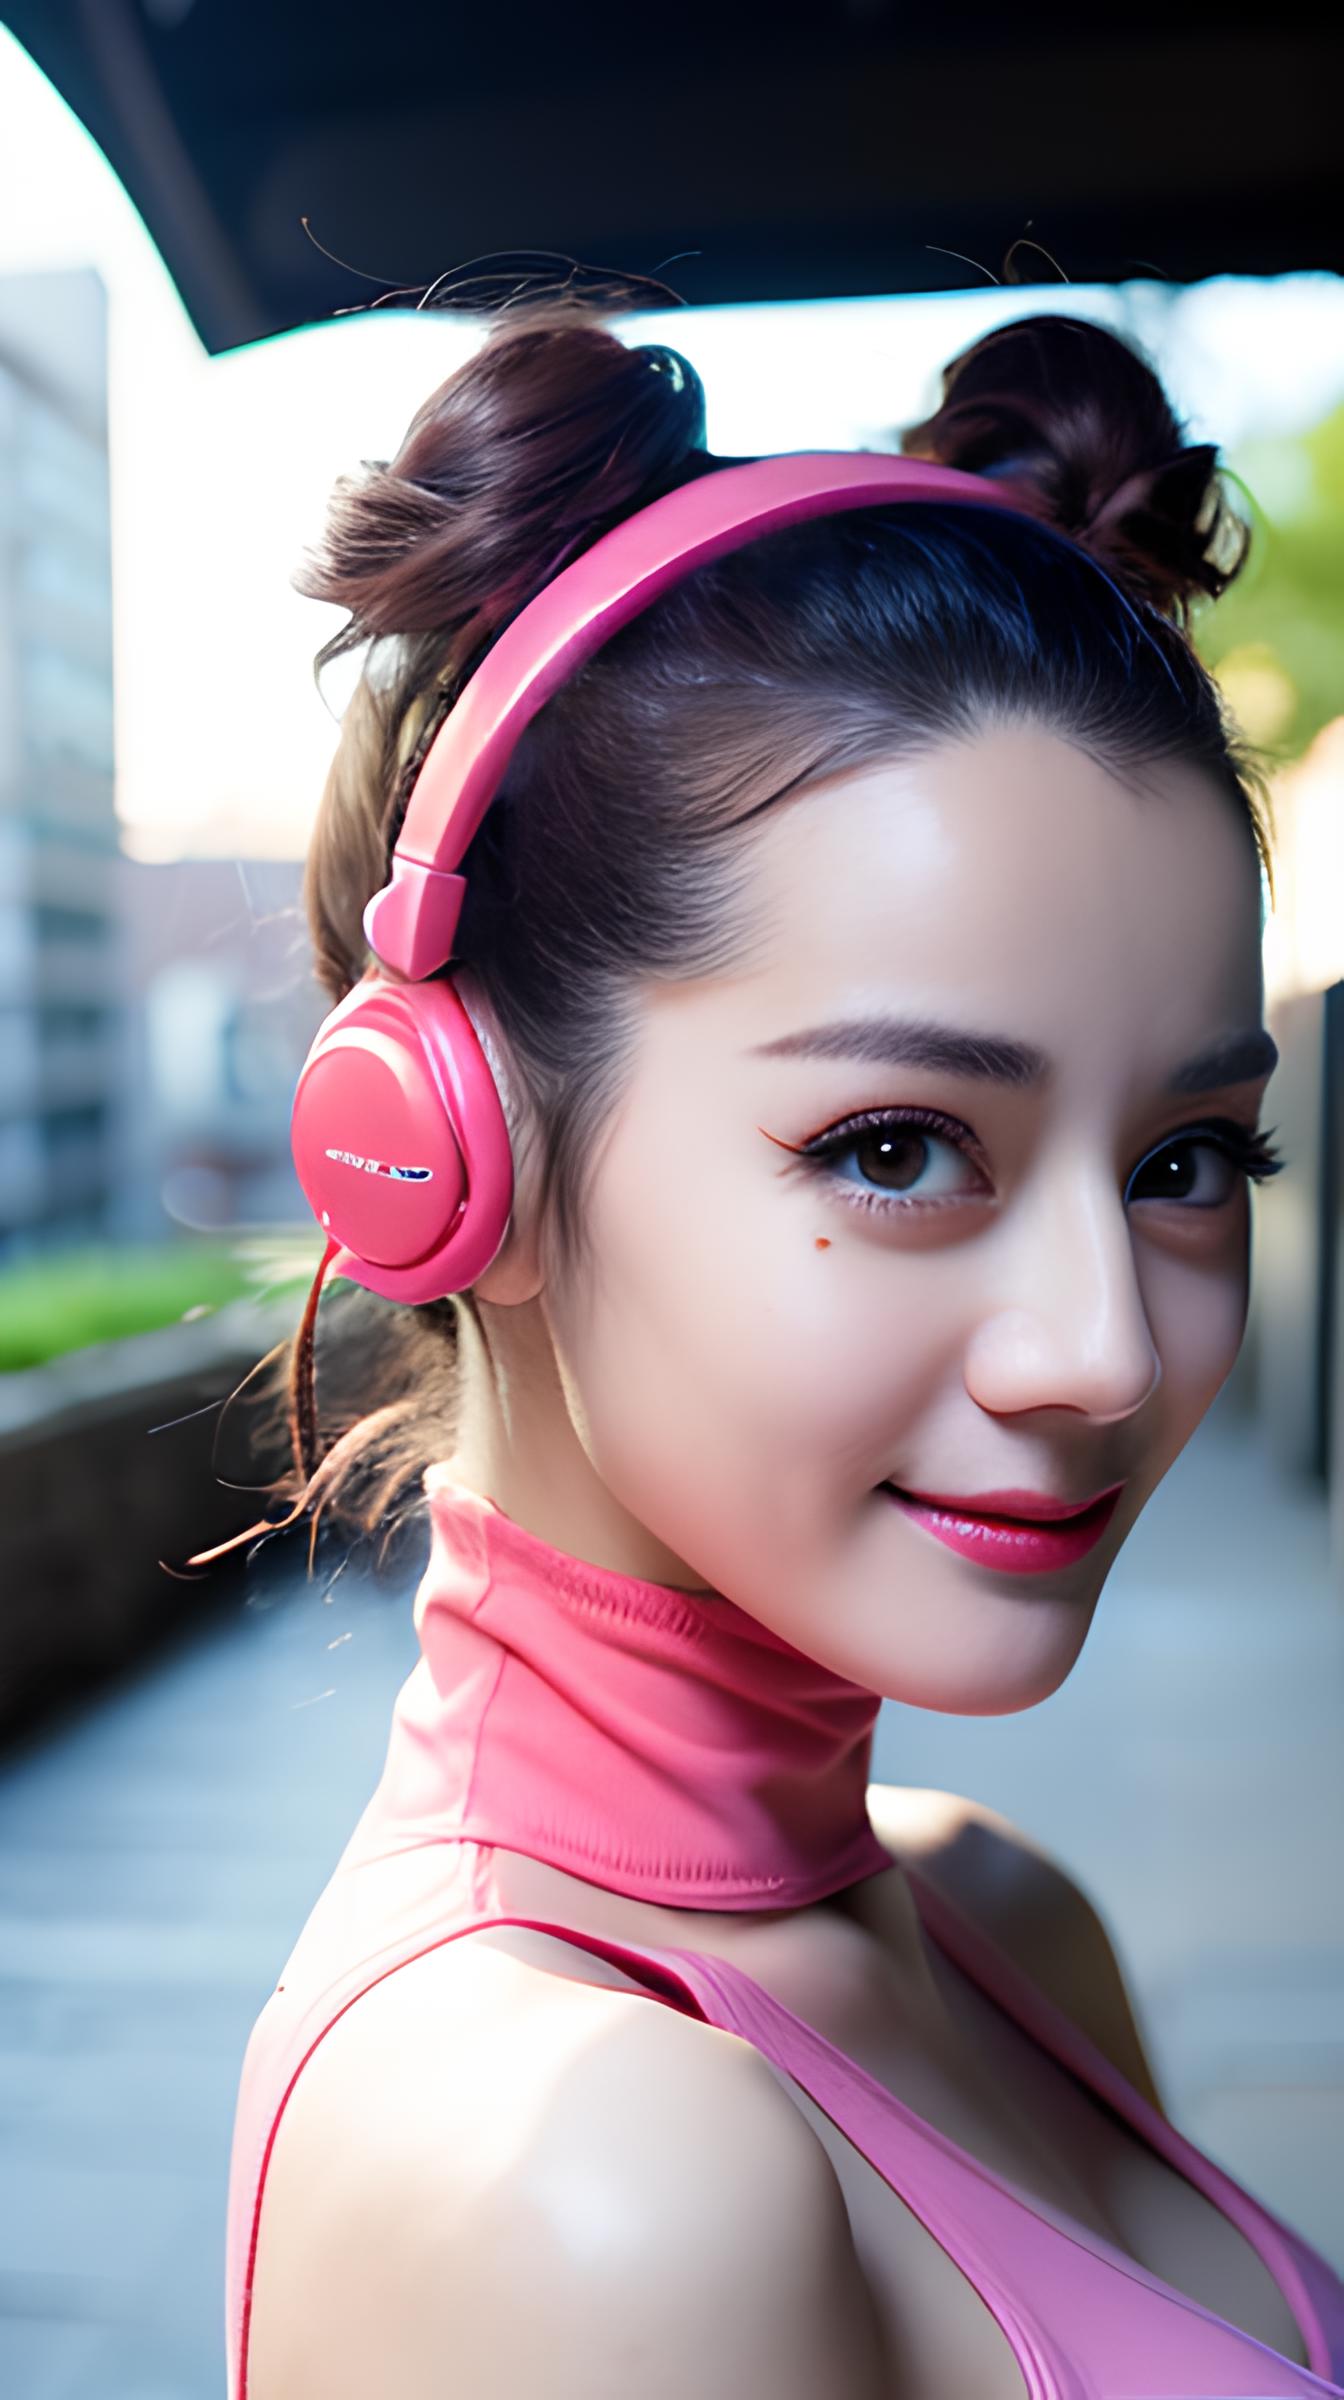 A woman wearing pink headphones with a pink shirt and pink lipstick on.